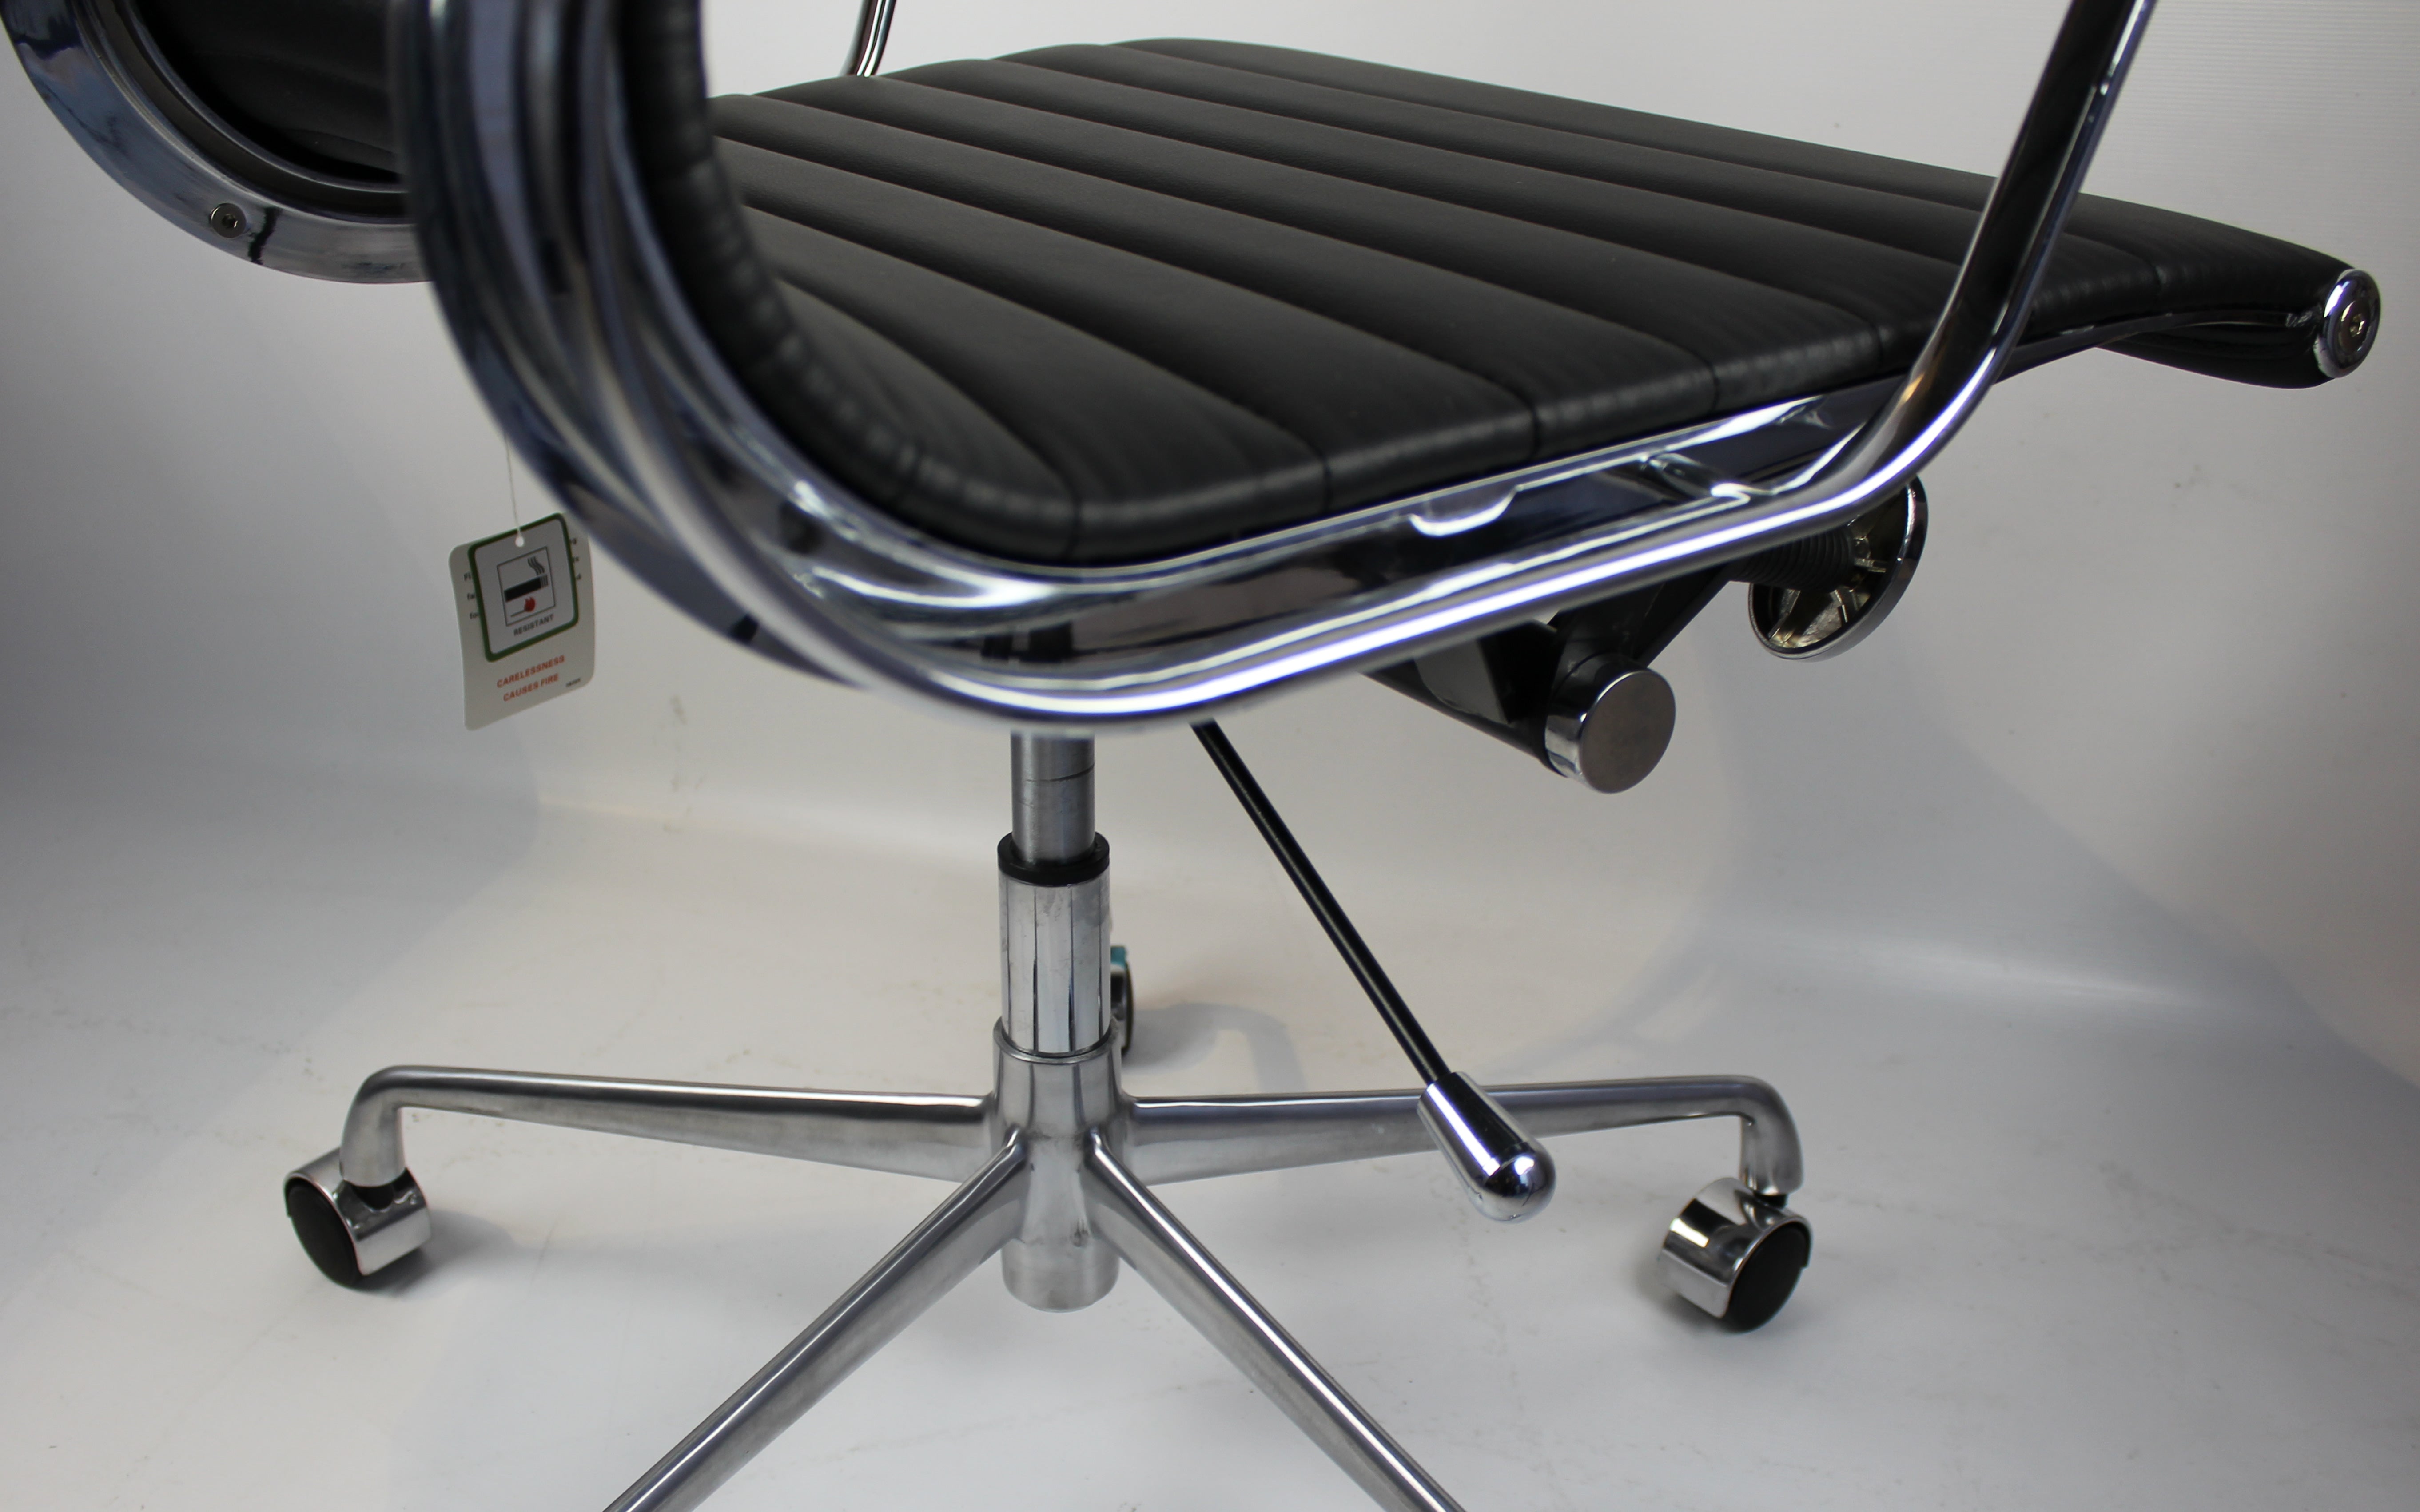 Modern Eames Style High Back Home or Commercial Office Chair - HB-A13